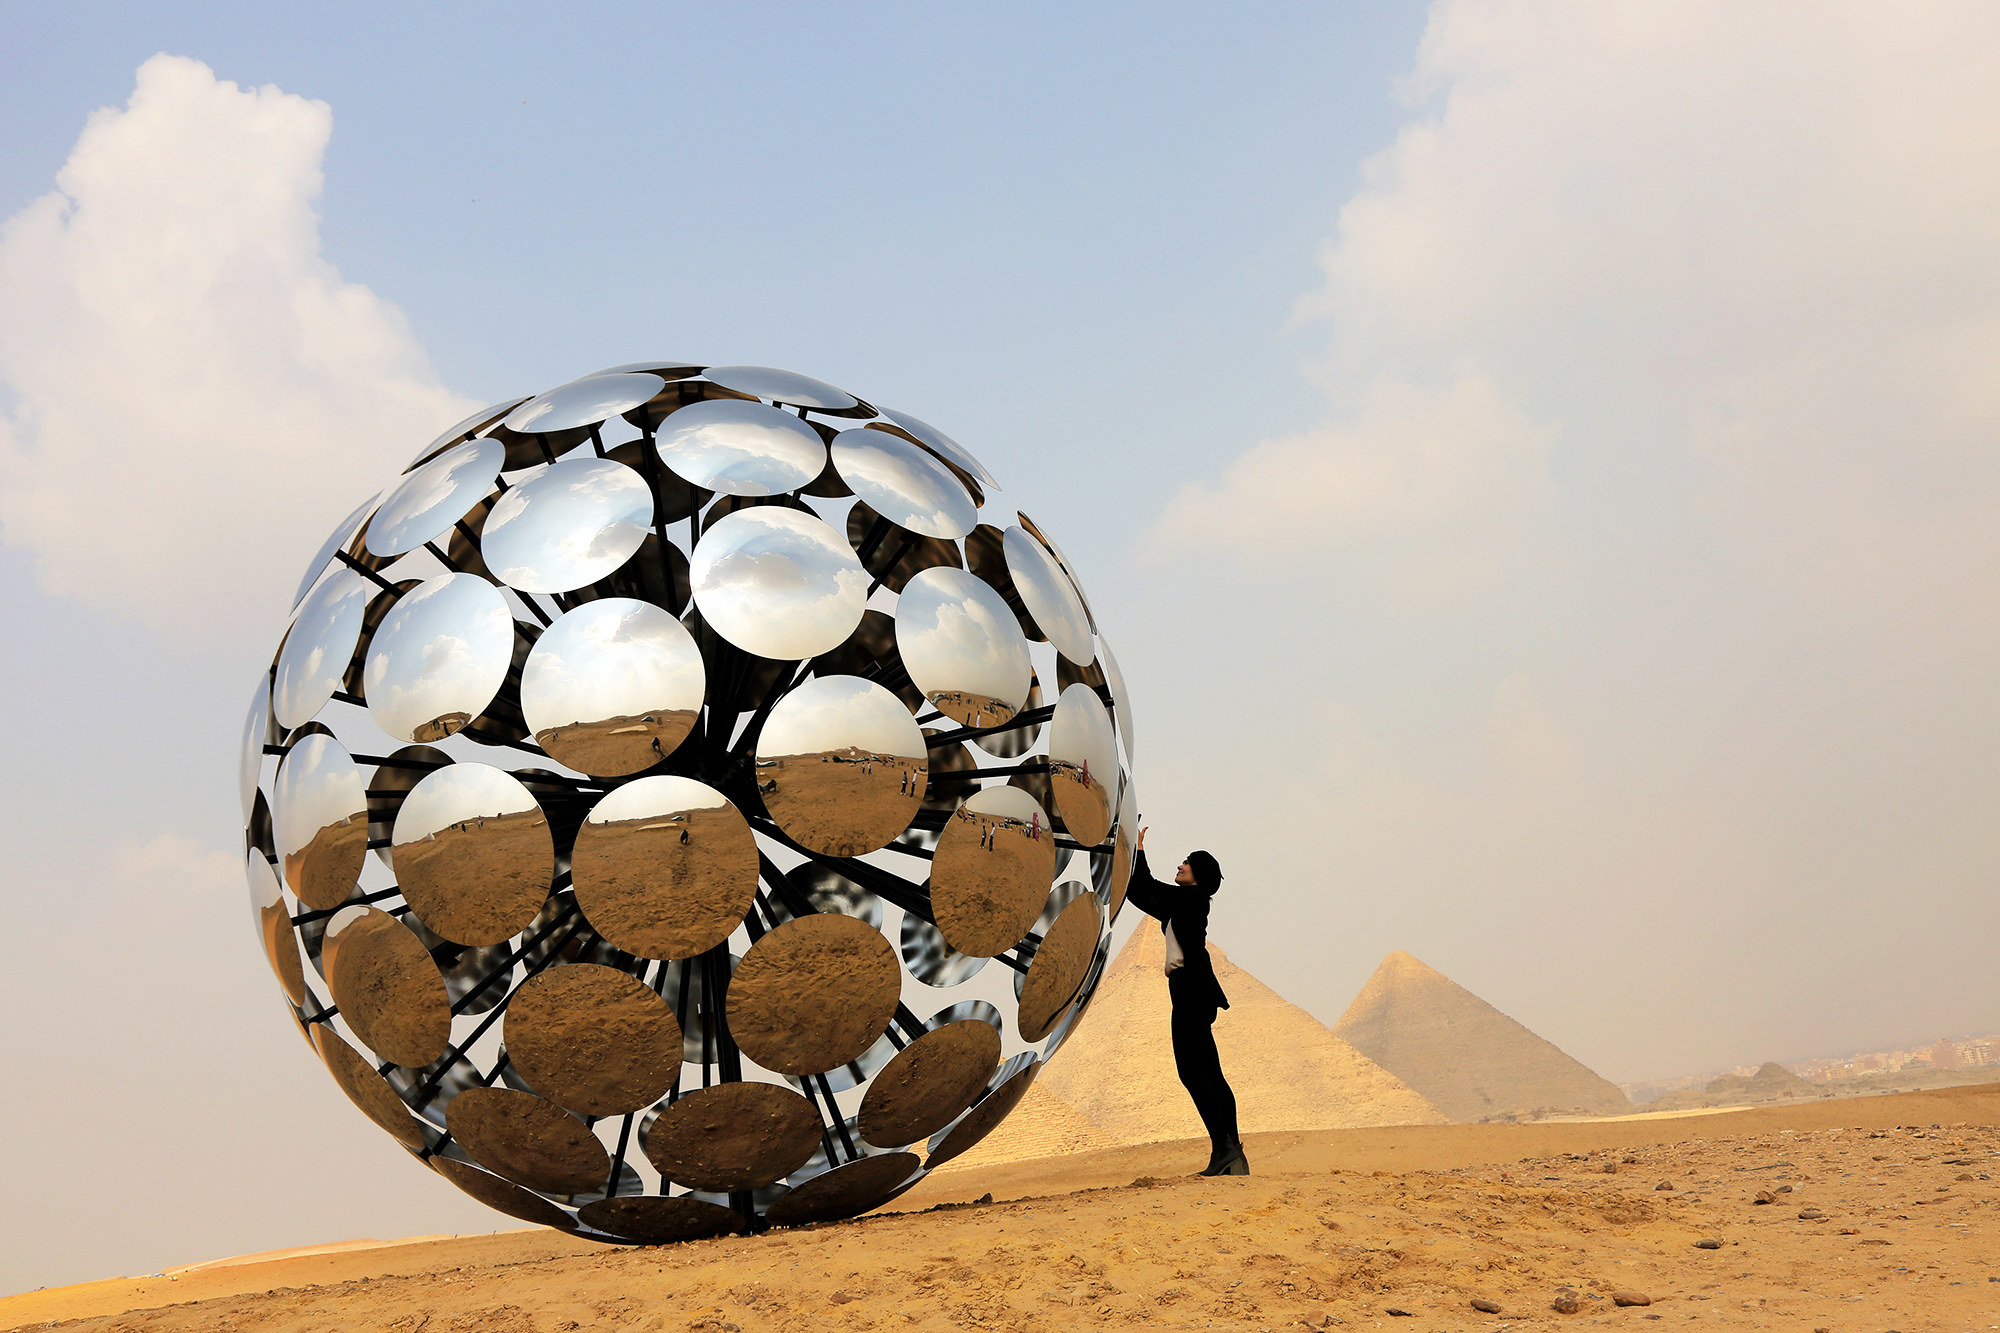 Someone holds up a giant silver reflective ball, in the background are the Giza pyramids